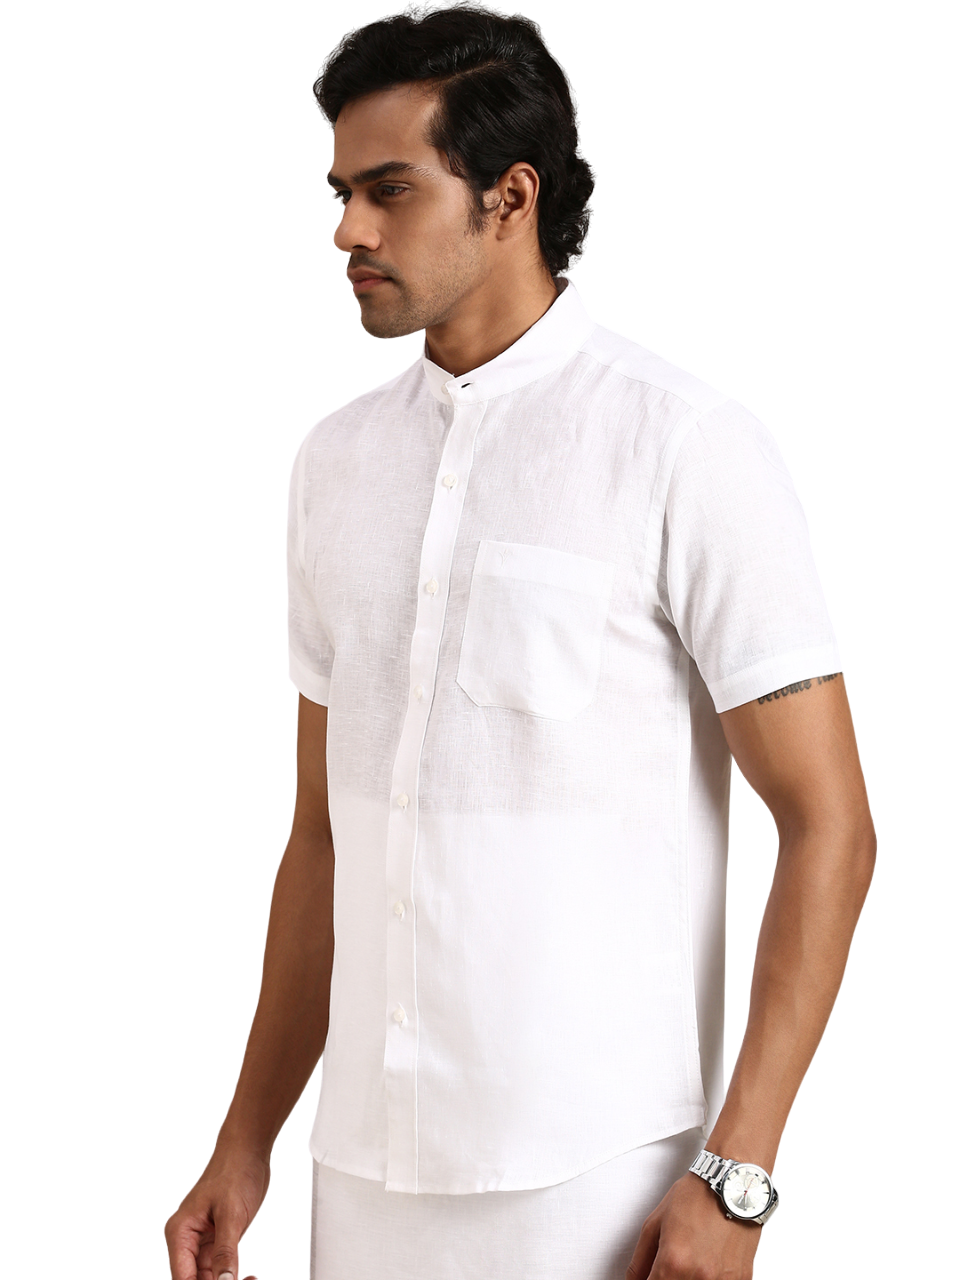 Mens 100% Linen Chinese Collar White Shirt Half Sleeves 5445-Side view